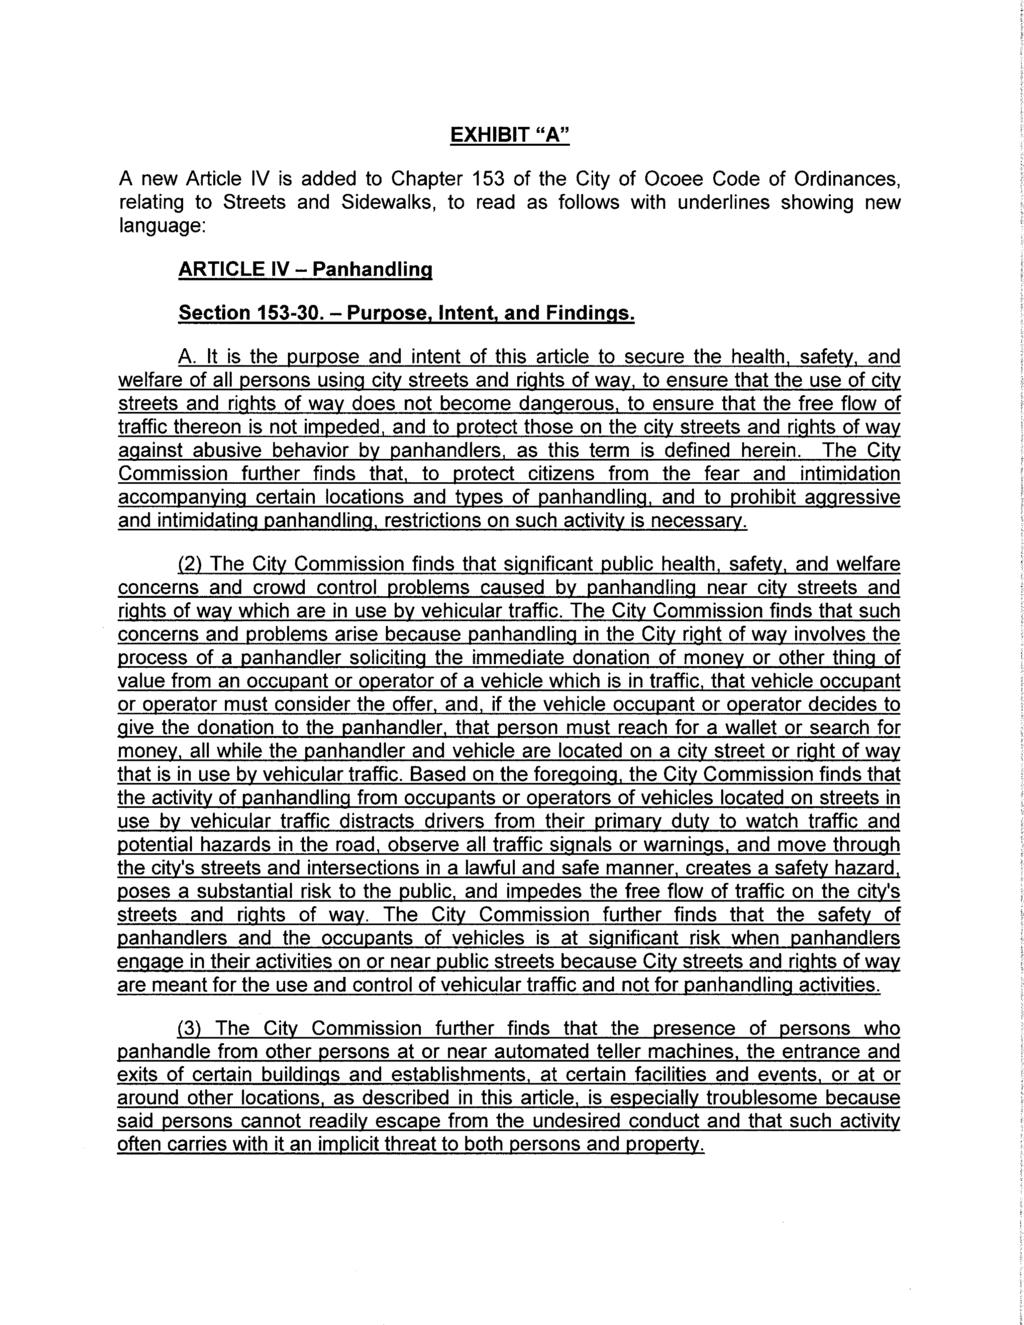 EXHIBIT " A" A new Article IV is added to Chapter 153 of the City of Ocoee Code of Ordinances, relating to Streets and Sidewalks, to read as follows with underlines showing new language: ARTICLE IV